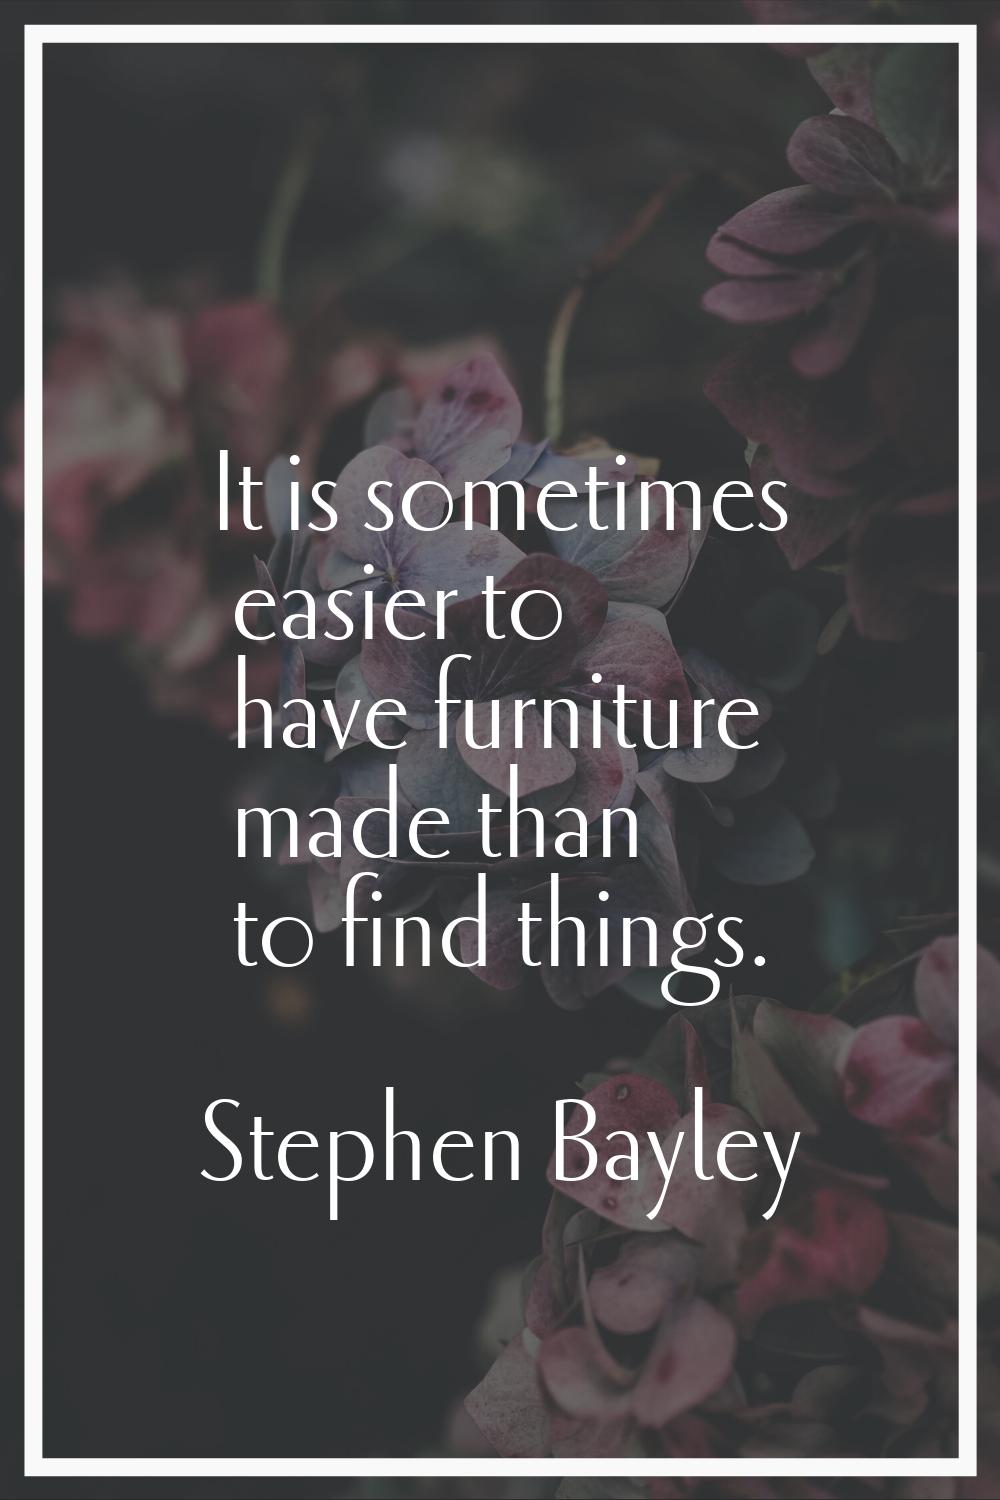 It is sometimes easier to have furniture made than to find things.